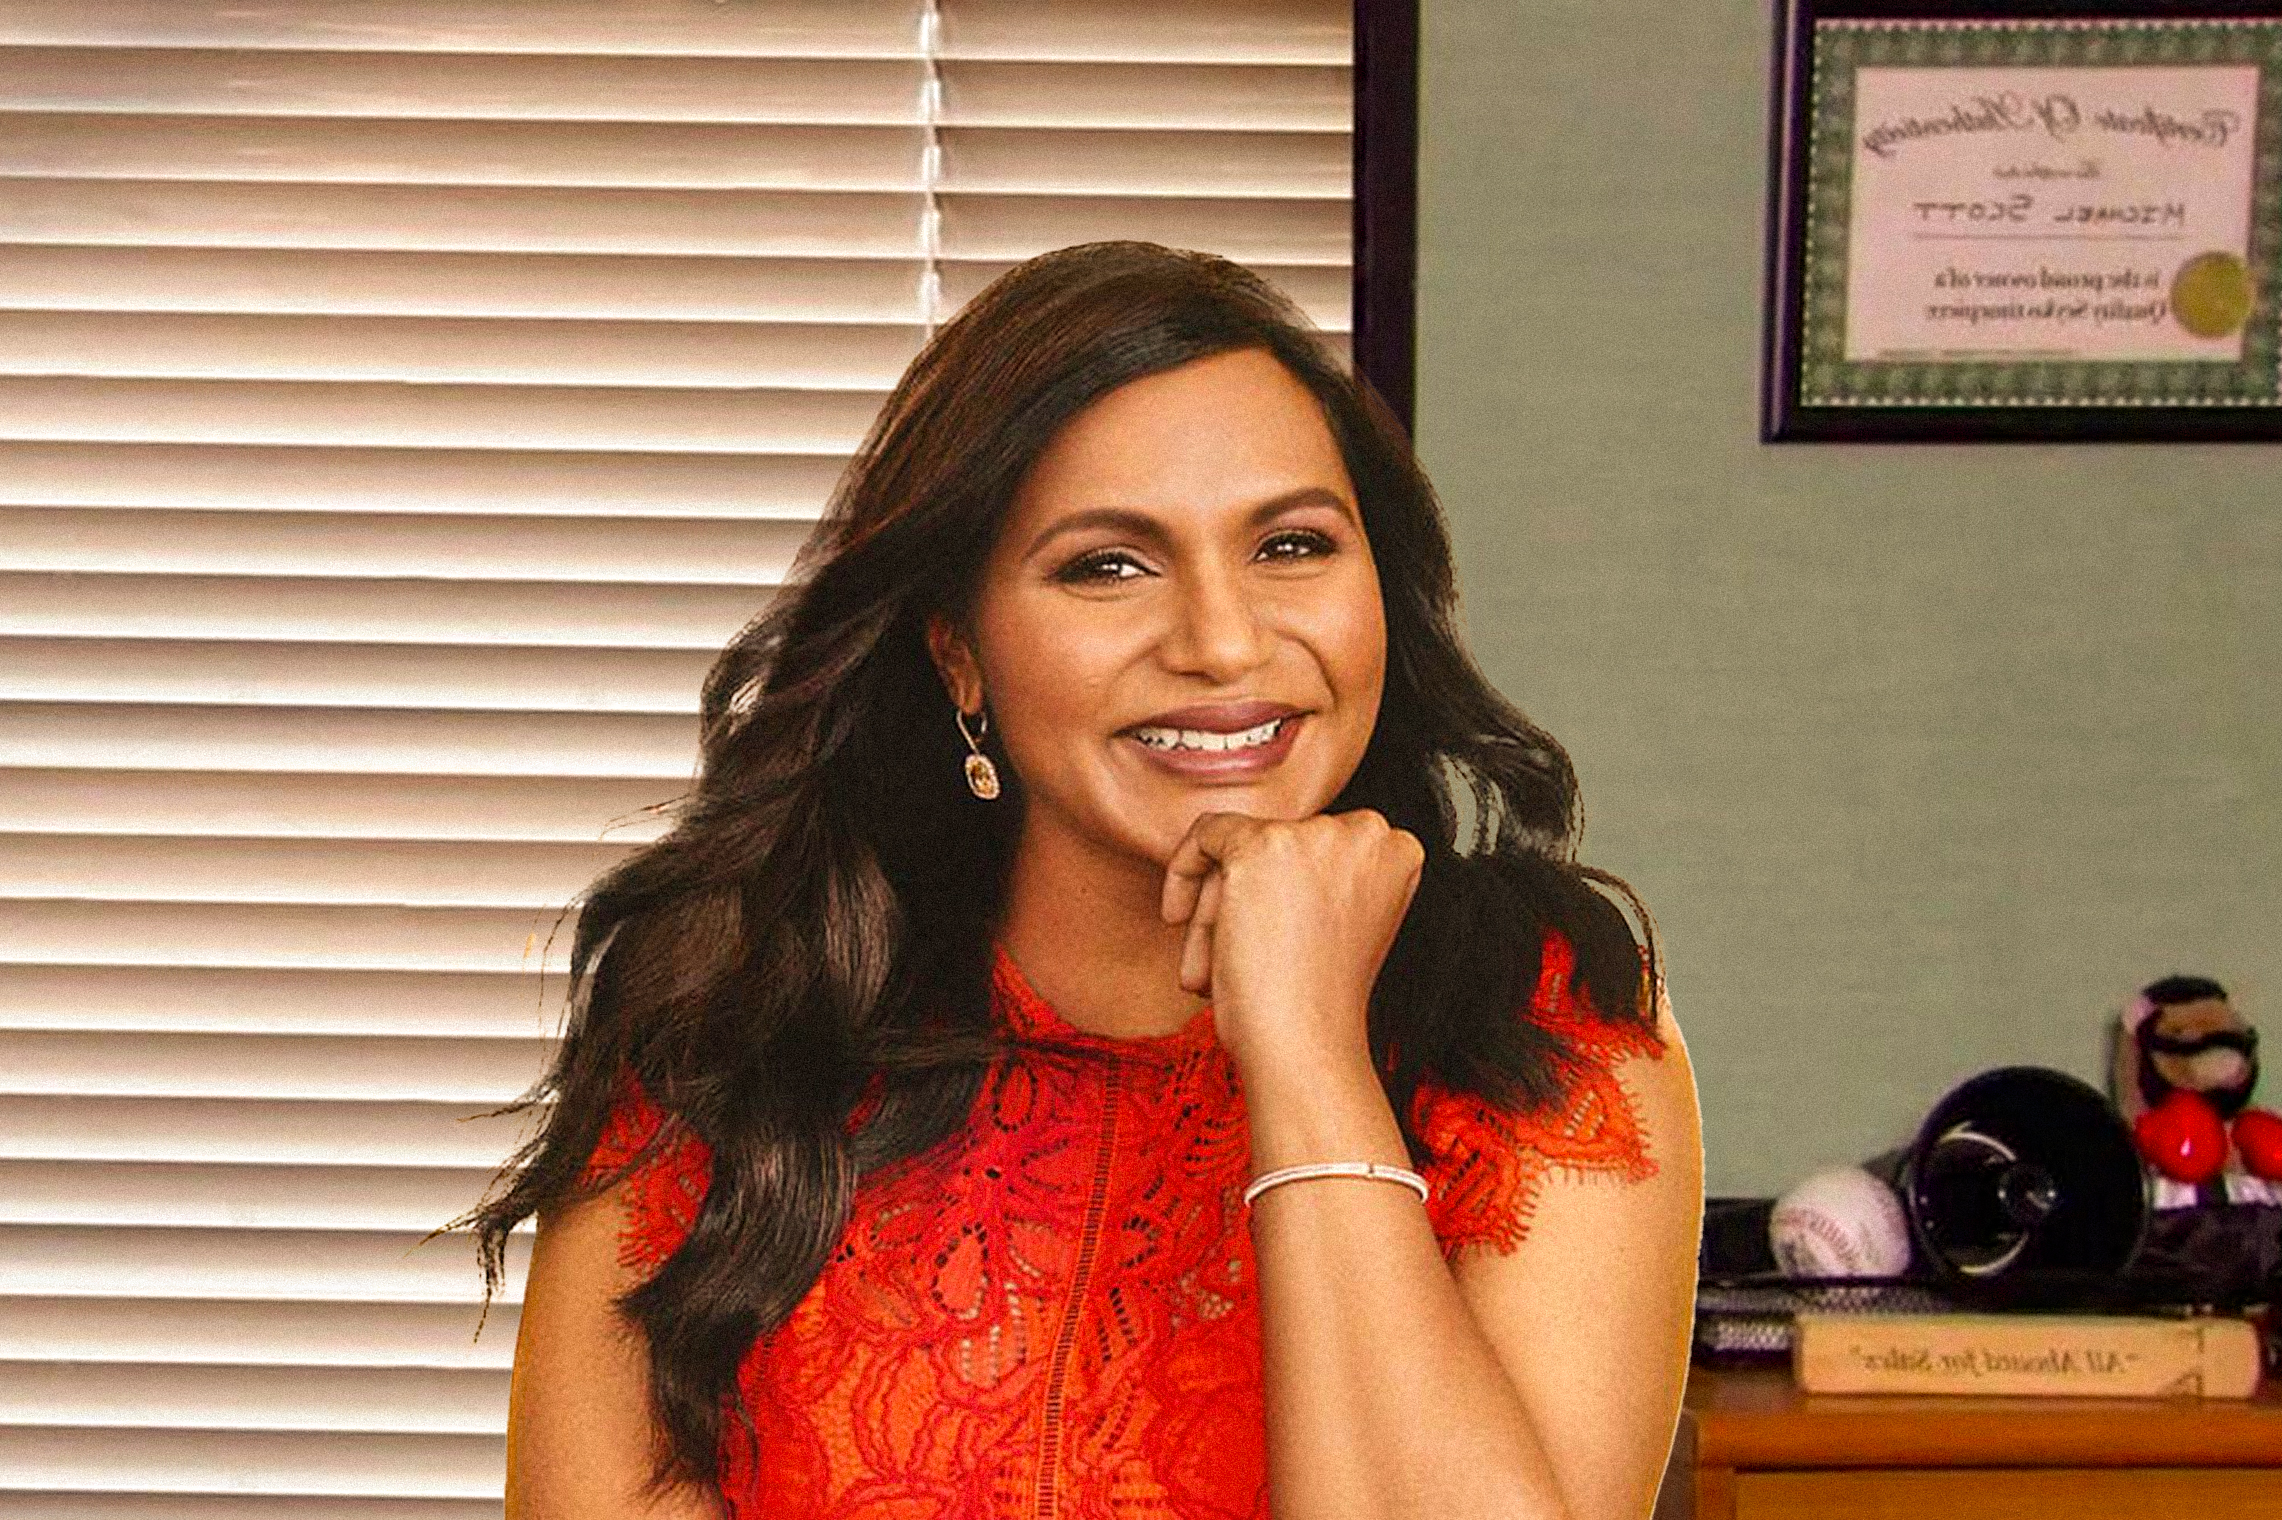 What Do We Do With a Problem Like Mindy Kaling?